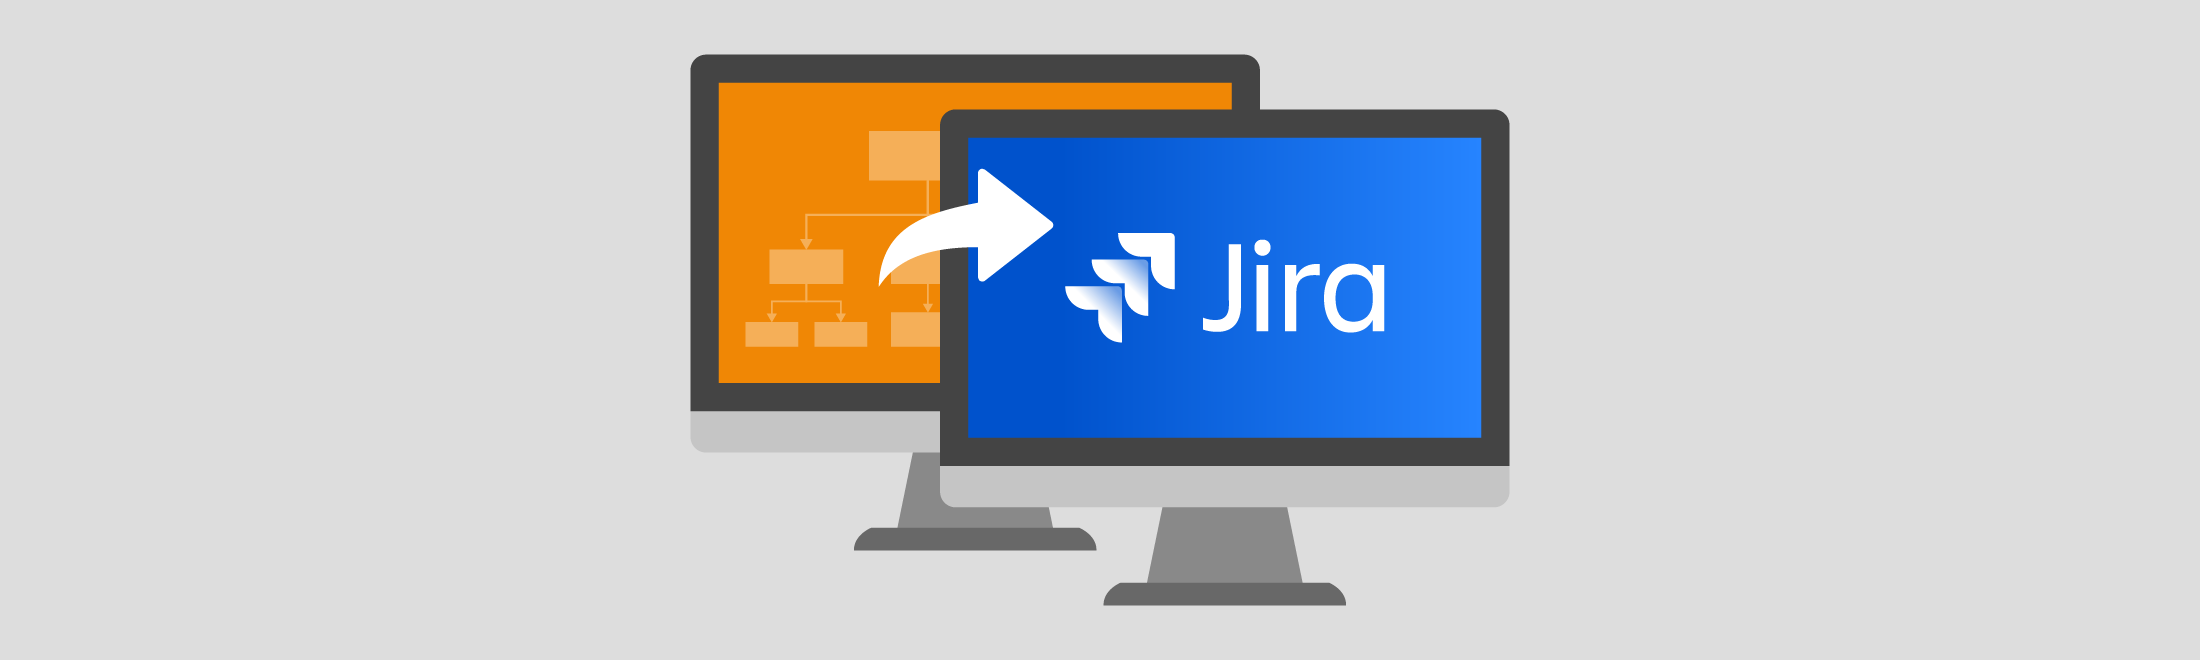 You can attach draw.io diagrams directly to the issues where they belong by using the draw.io app for Jira.